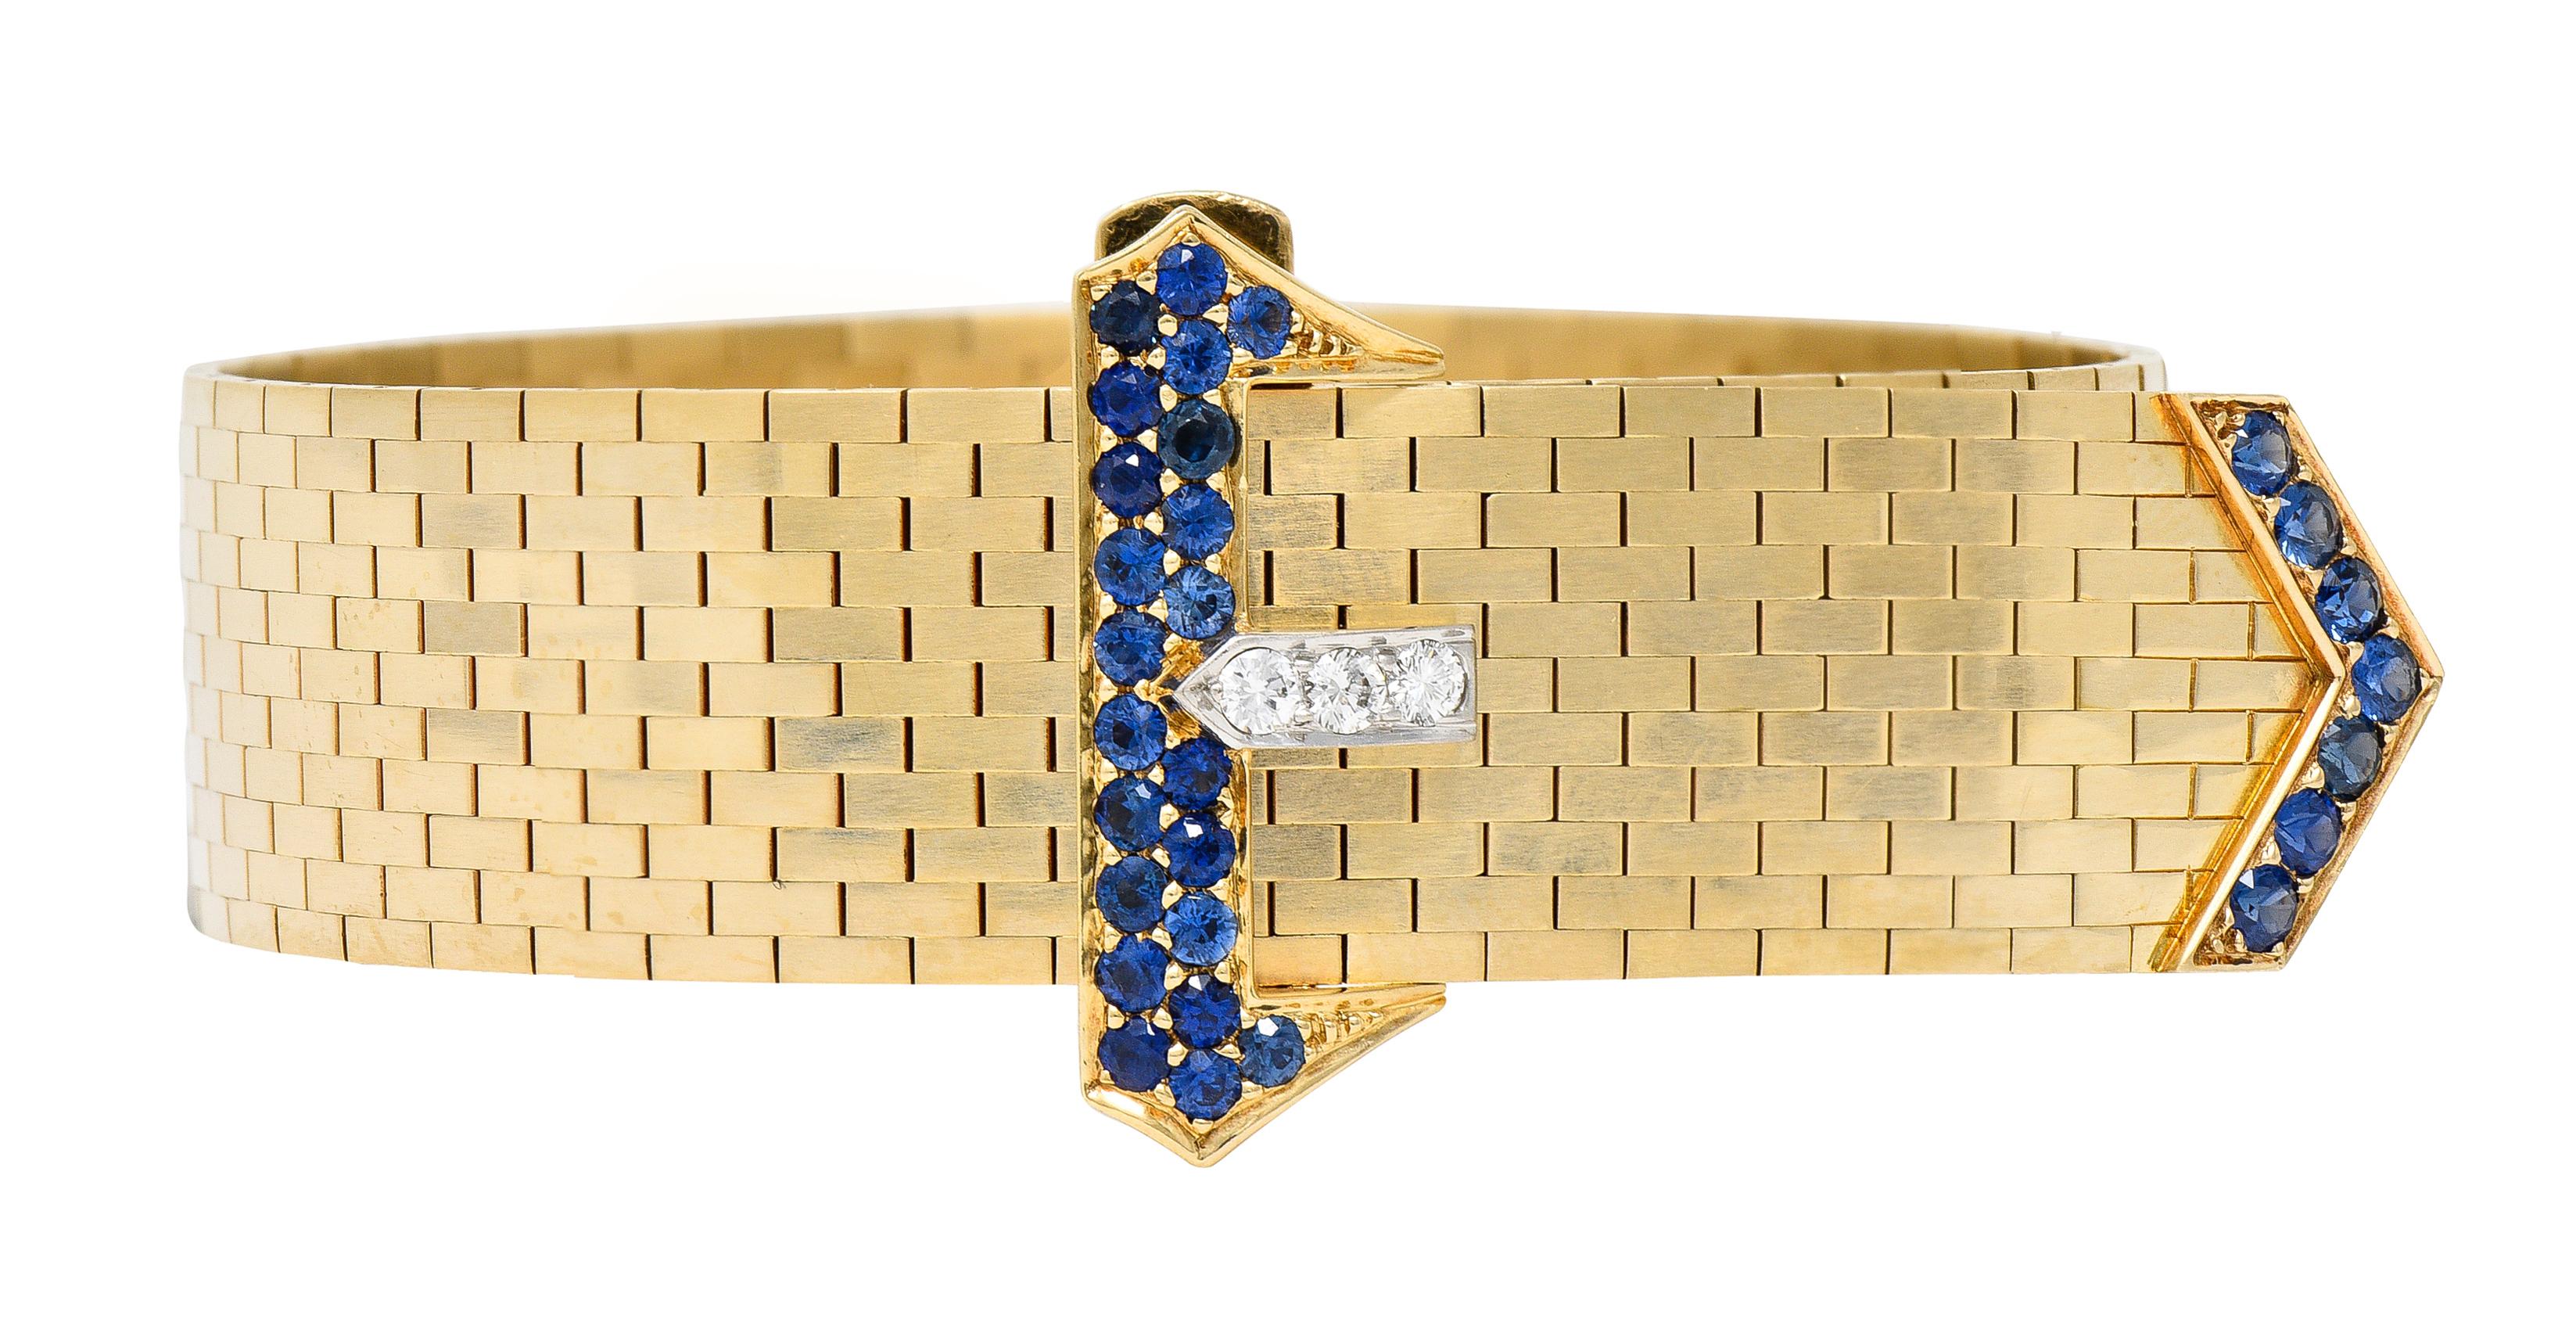 Designed as a flexible meshed gold chain terminating with a belt buckle and tongue motif
Buckle terminals feature round-cut sapphires weighing approximately 1.45 carats total
Transparent medium blue in color - bead set
With round brilliant cut